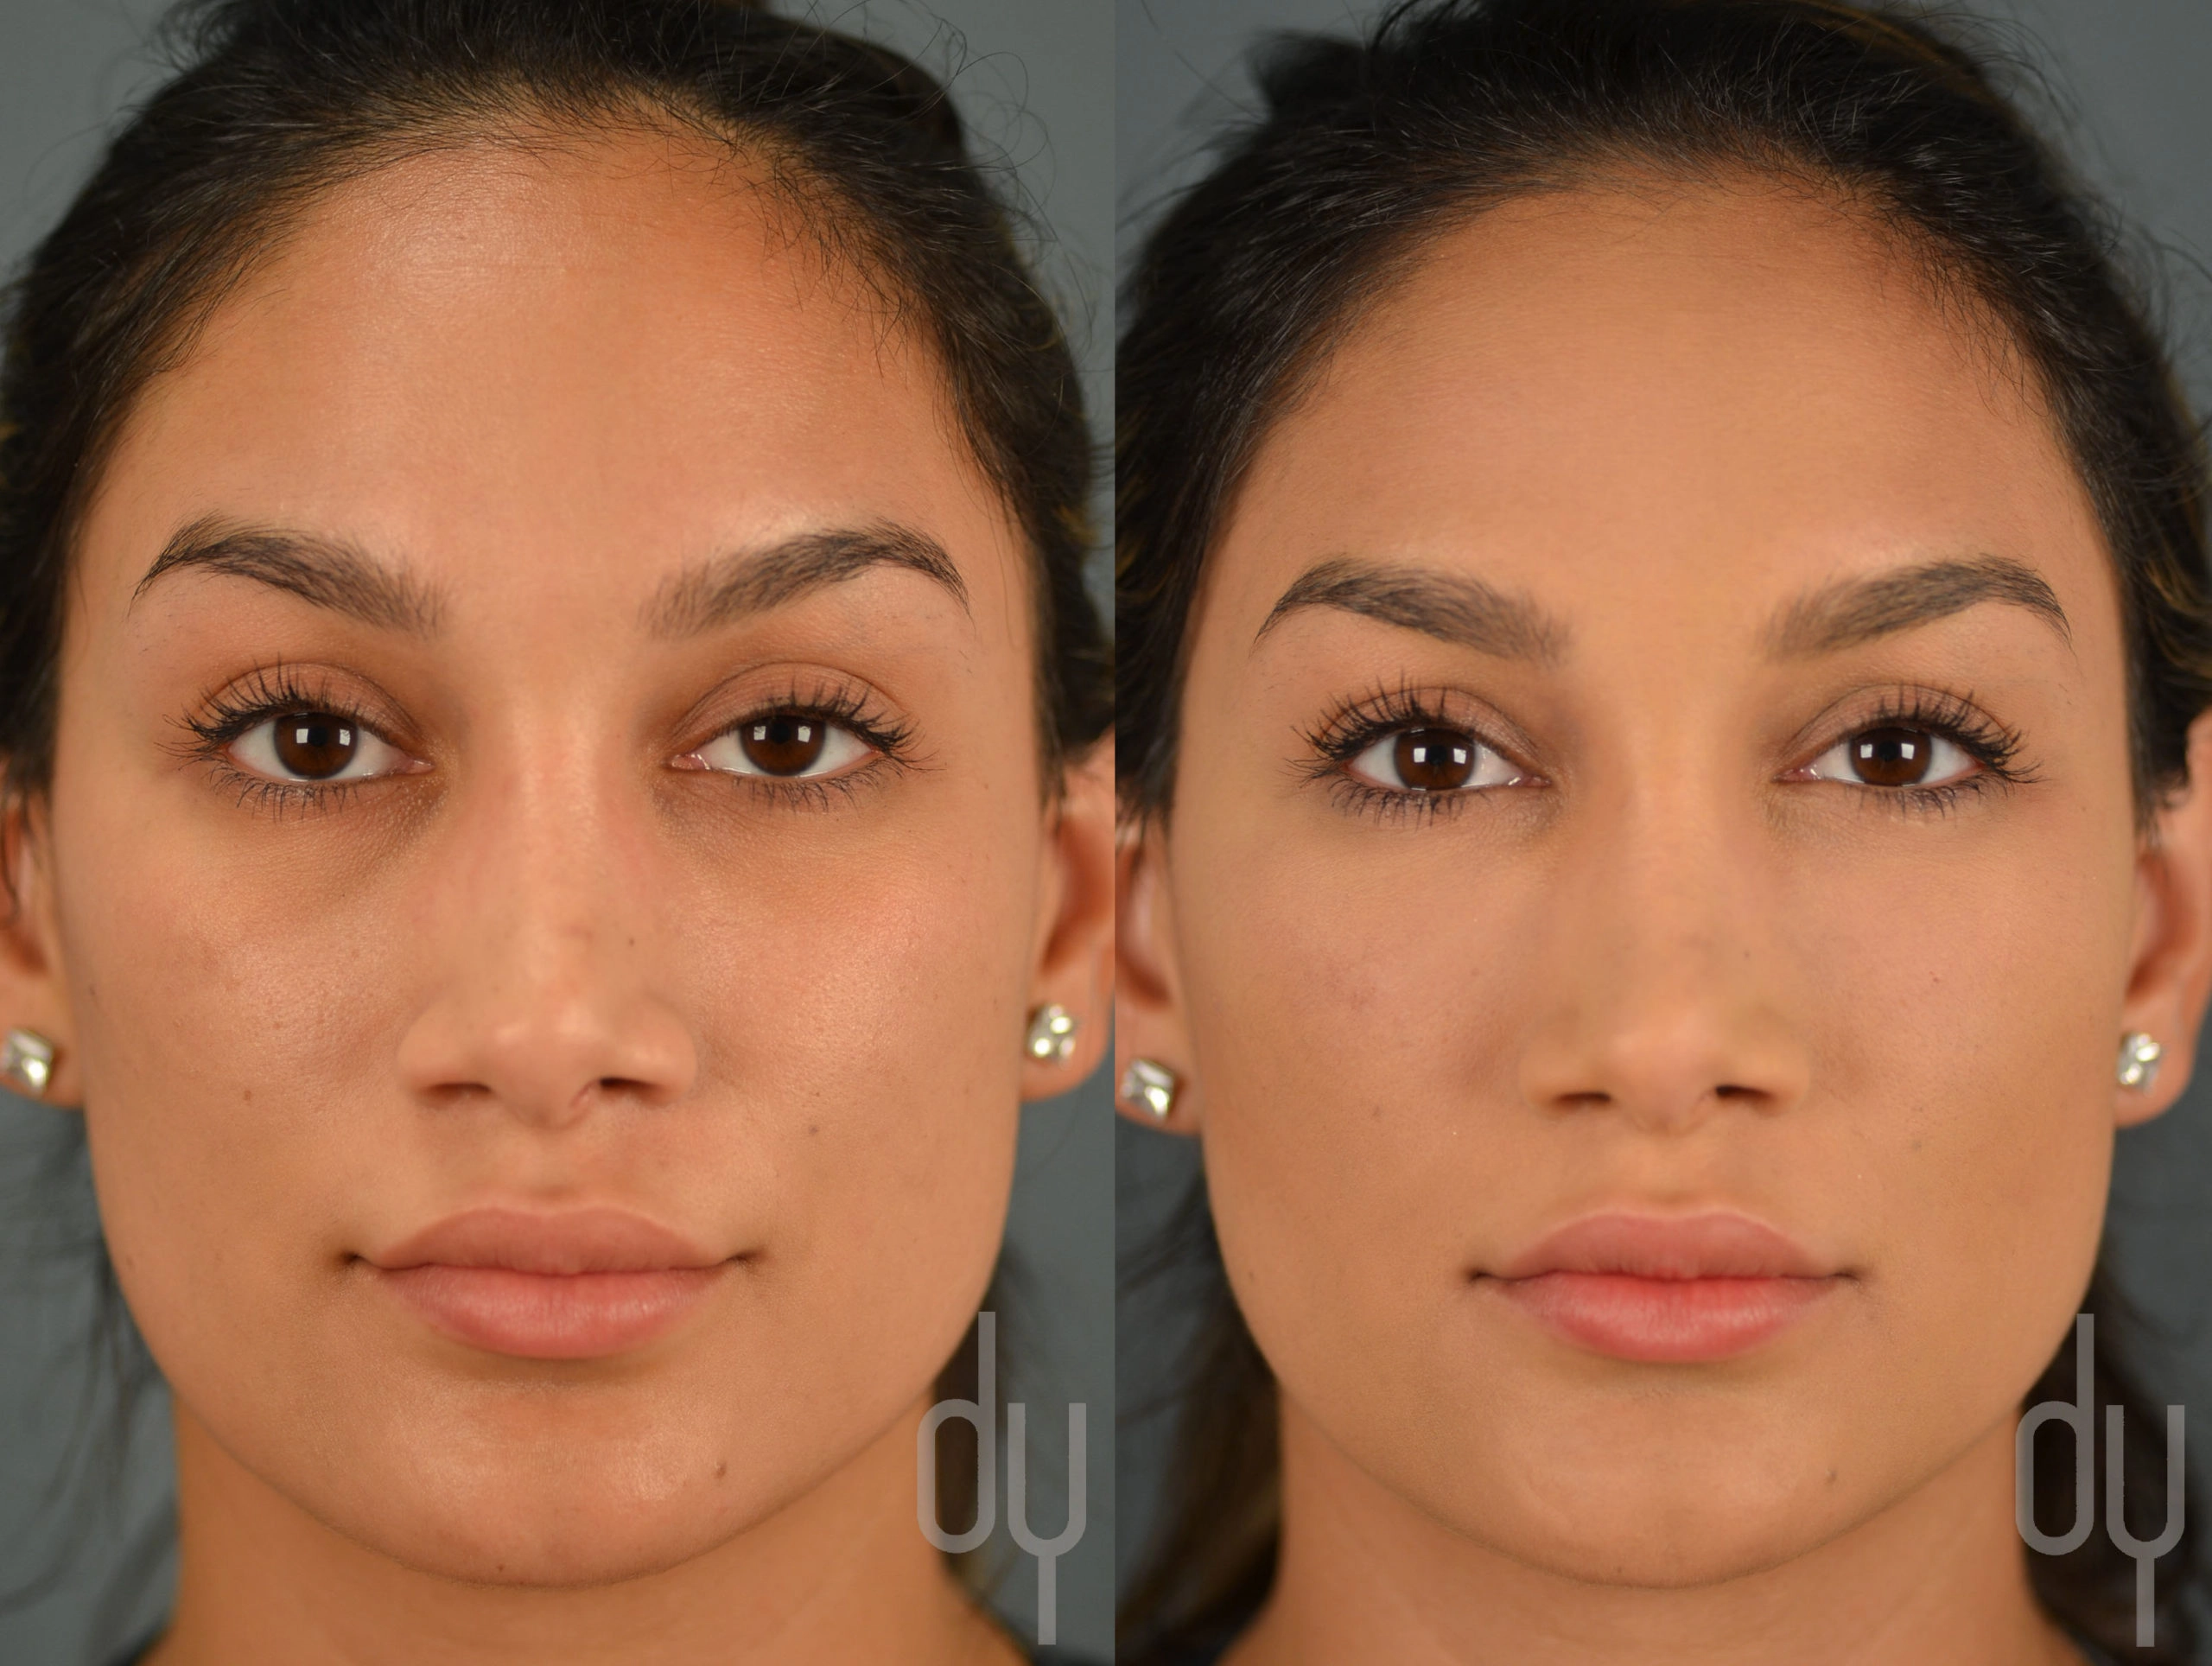 Who is a good candidate for under eye filler injections?